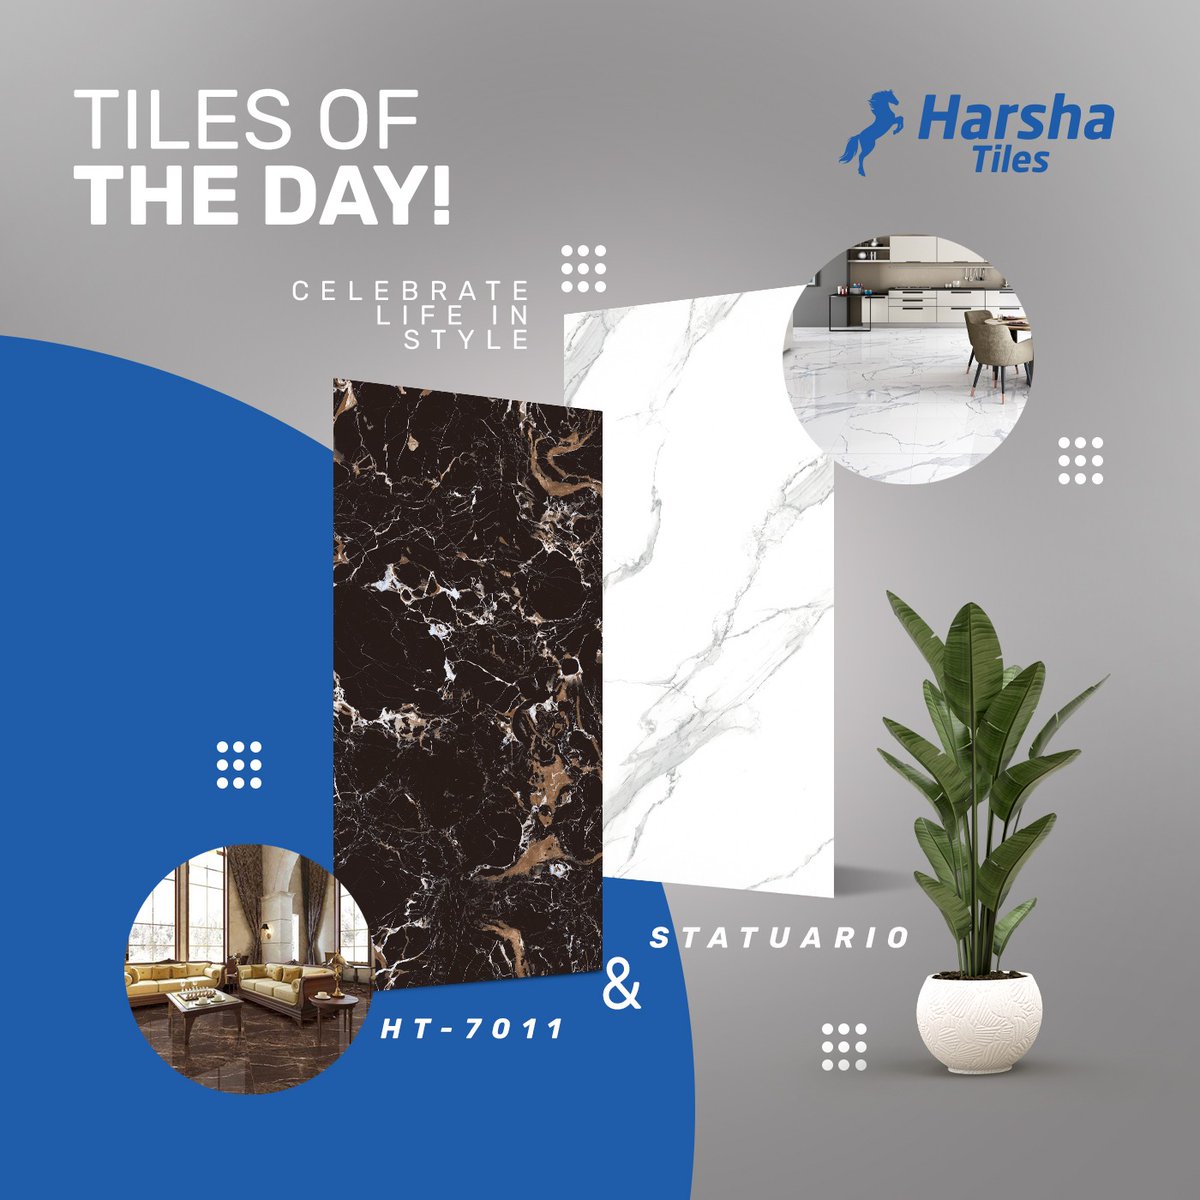 Elevate your space with top-class tiles. Enhance your experience with style and quality. Explore our collection today at Harsha tiles.
.
.
#Harshatiles #TopClassTiles #LuxuryLiving #InteriorDesign #ExquisiteDesign #PremiumTiles
#LuxuryHome #HomeDecor #QualityTiles